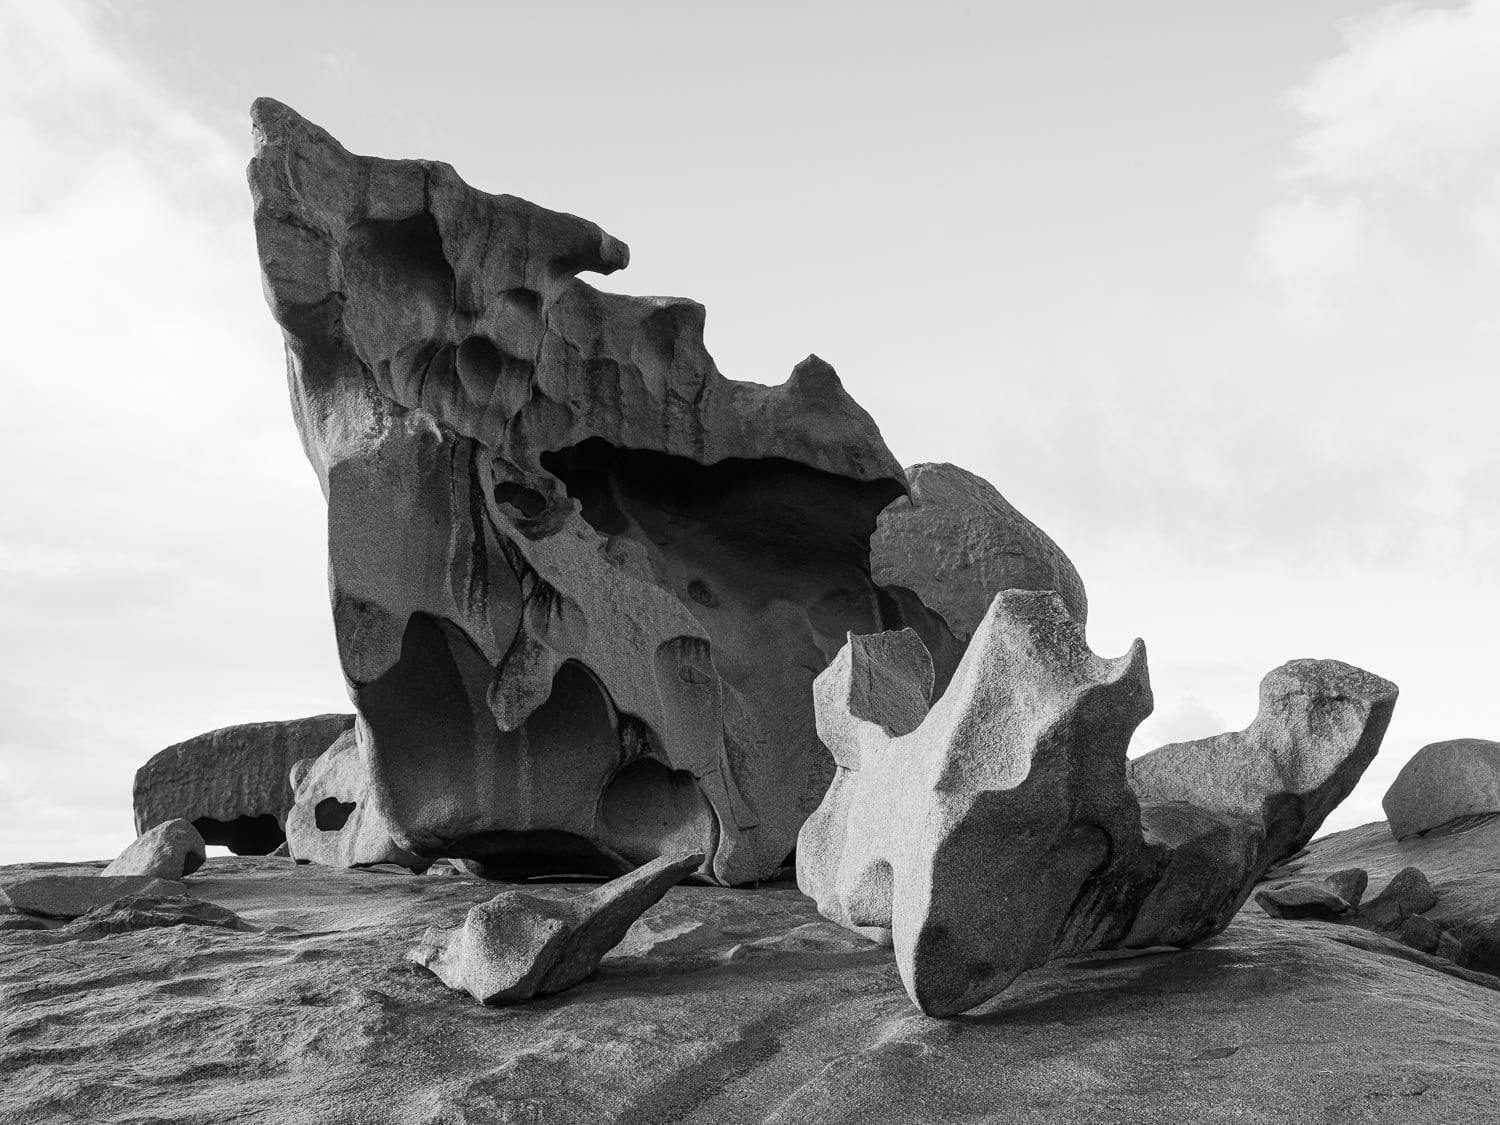 A unique design formed by a large rocky stone with a sharp pointing edge, Remarkable Rocks #13 - Kangaroo Island SA